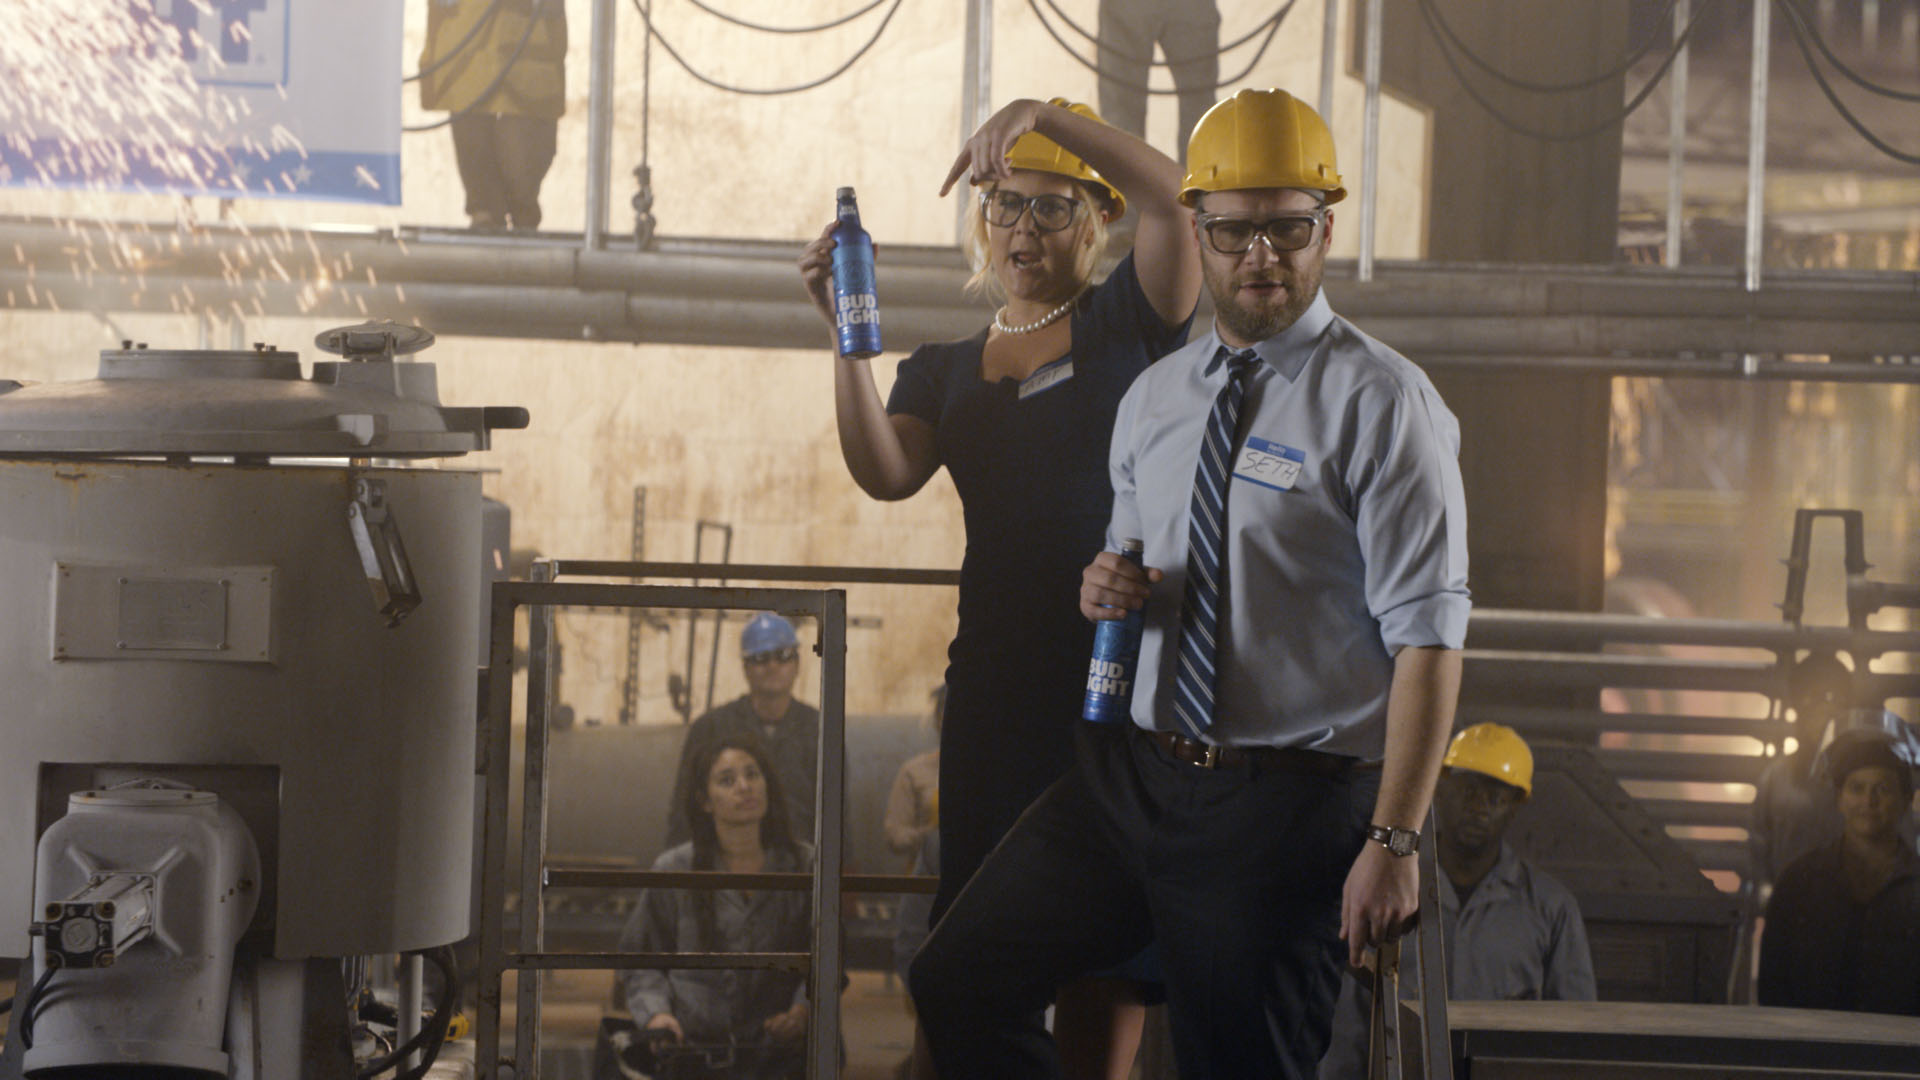 The Bud Light Party Launches, “Labels,” Furthering the Brand's Mission To Bring People Together Over Beer